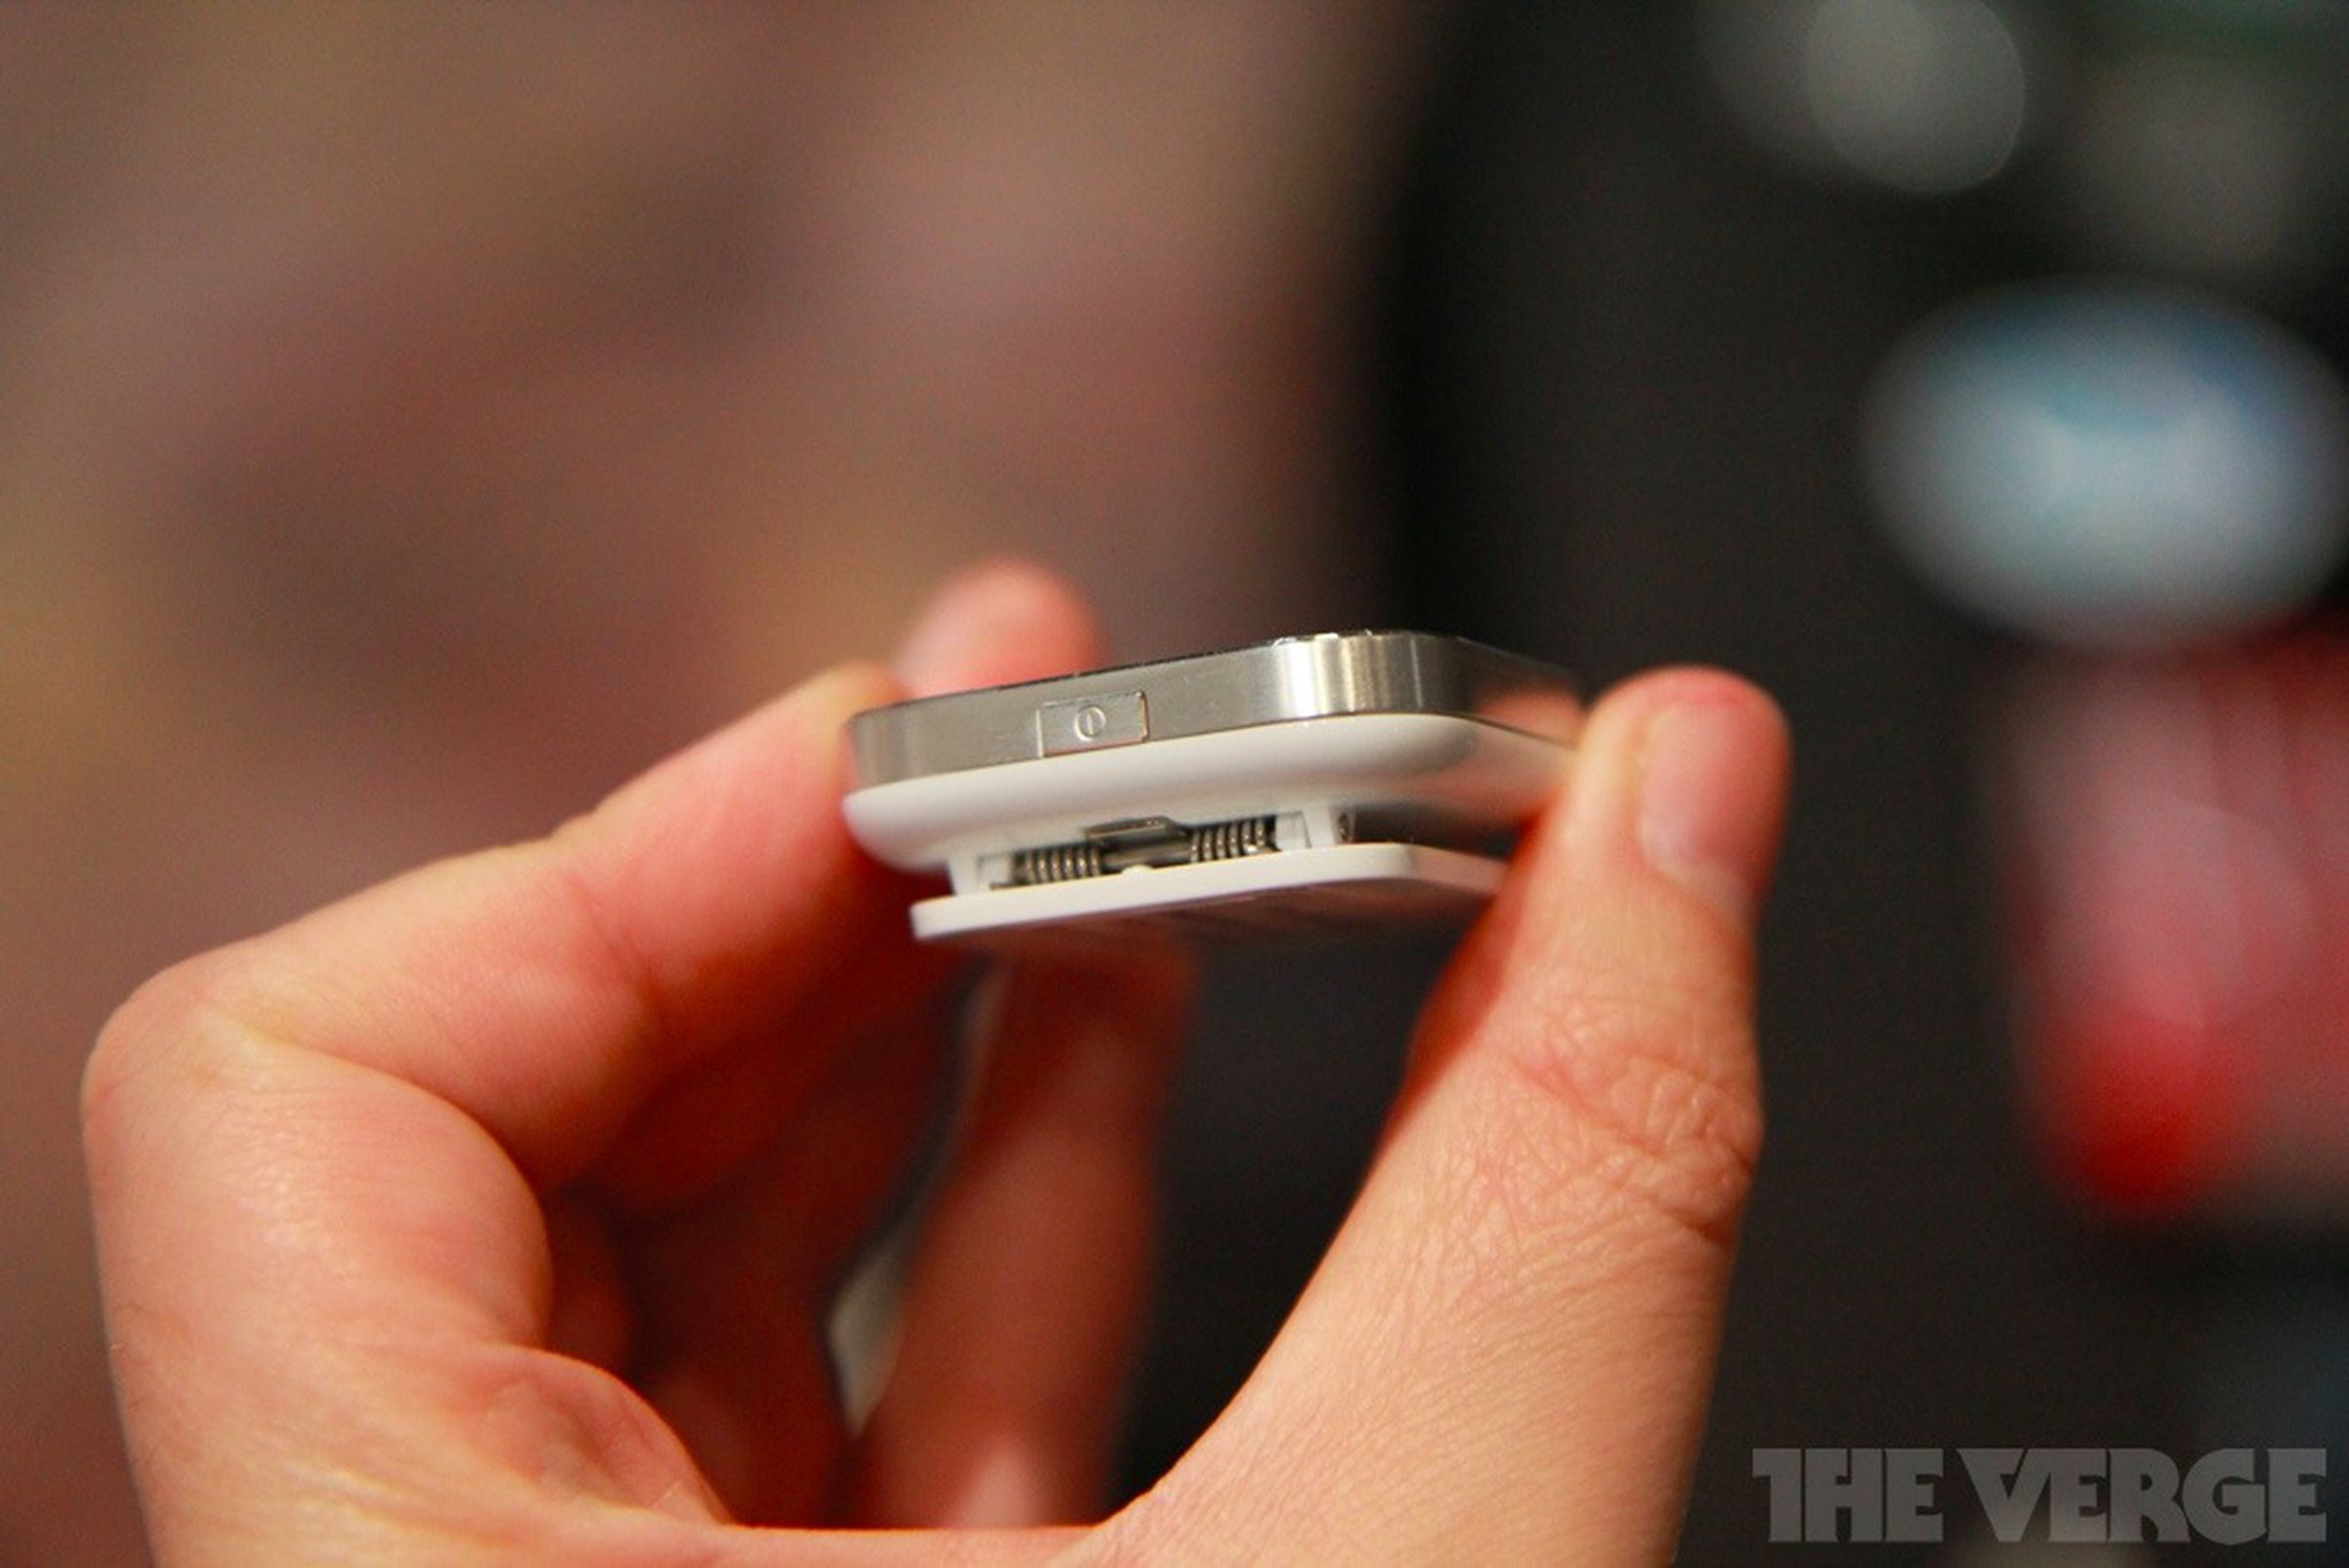 Sony Smart Watch (aka Sony Ericsson LiveView 2) hands-on pictures